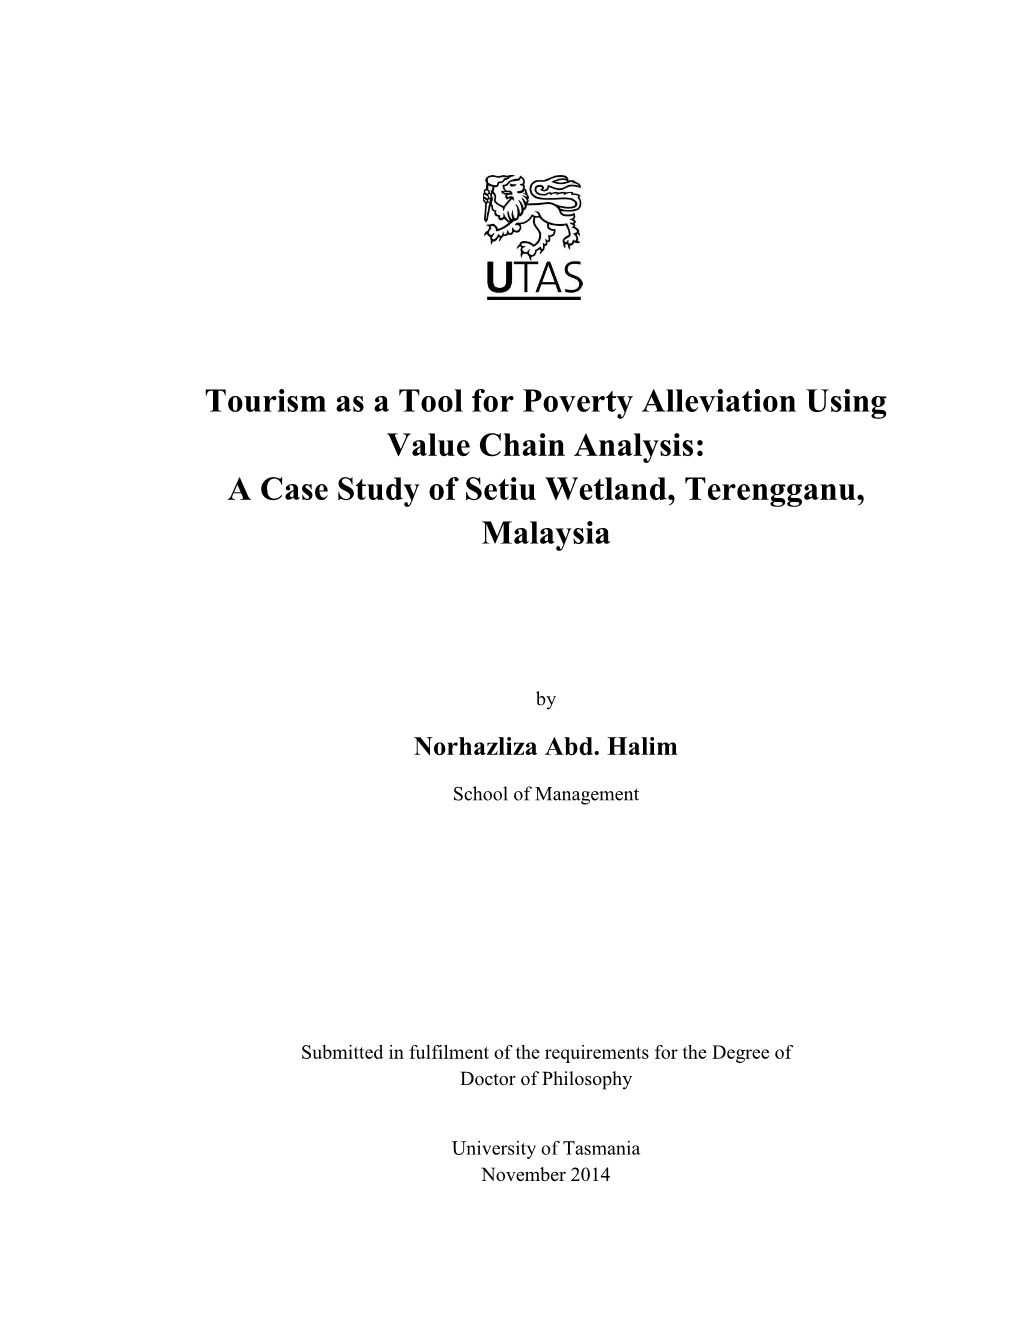 Tourism As a Tool for Poverty Alleviation Using Value Chain Analysis: a Case Study of Setiu Wetland, Terengganu, Malaysia